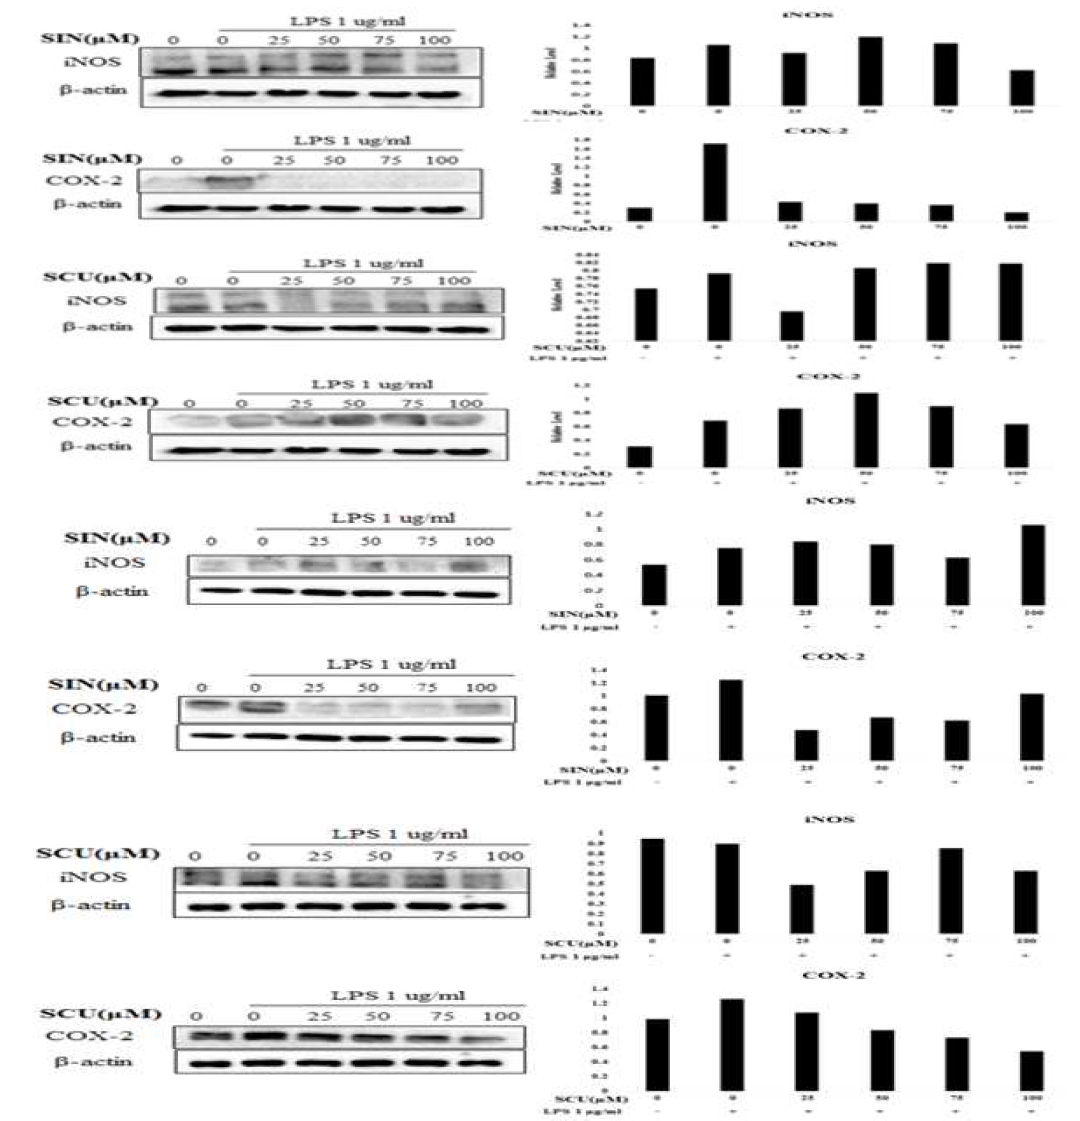 Expression of iNOS and COX-2 in LPS stimulated L6 skeletal muscle cells by Sinensetin and Scutellarein treatment. The effect of Sinensetin and Scutellarein on the expression of iNOS and COX-2 protein were determined by western blot, respectively